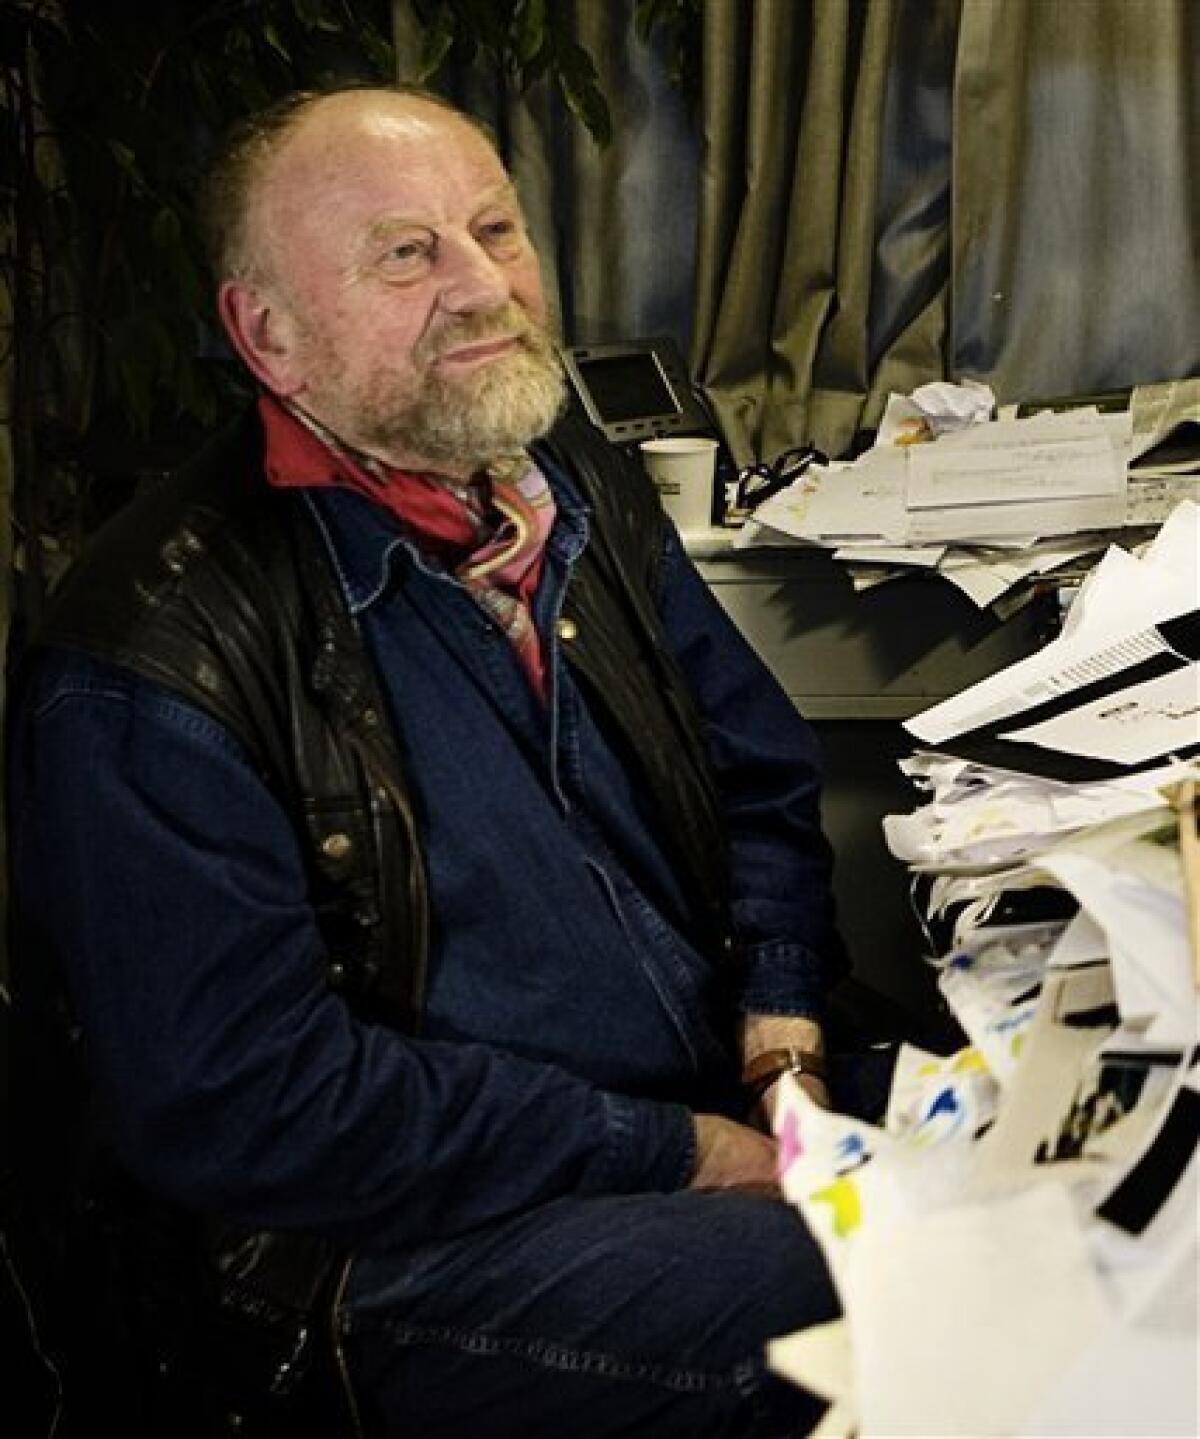 FILE- In this Oct. 27, 2009 file photo, Danish cartoonist Kurt Westergaard, sits in the offices of Danish newspaper Jyllands-Posten in Aarhus, Denmark. Police foiled an attempt to kill an artist who drew cartoons depicting the Prophet Muhammad that sparked outrage in the Muslim world, the head of Denmark's intelligence service said Saturday, Jan. 2, 2010. Jakob Scharf, who heads the PET intelligence service, said a 28-year-old Somalia man was armed with an ax and a knife when he attempted to enter Kurt Westergaard's home in Aarhus shortly after 10 p.m. (2100 GMT) on Friday.(AP Photo/Polfoto) DENMARK OUT